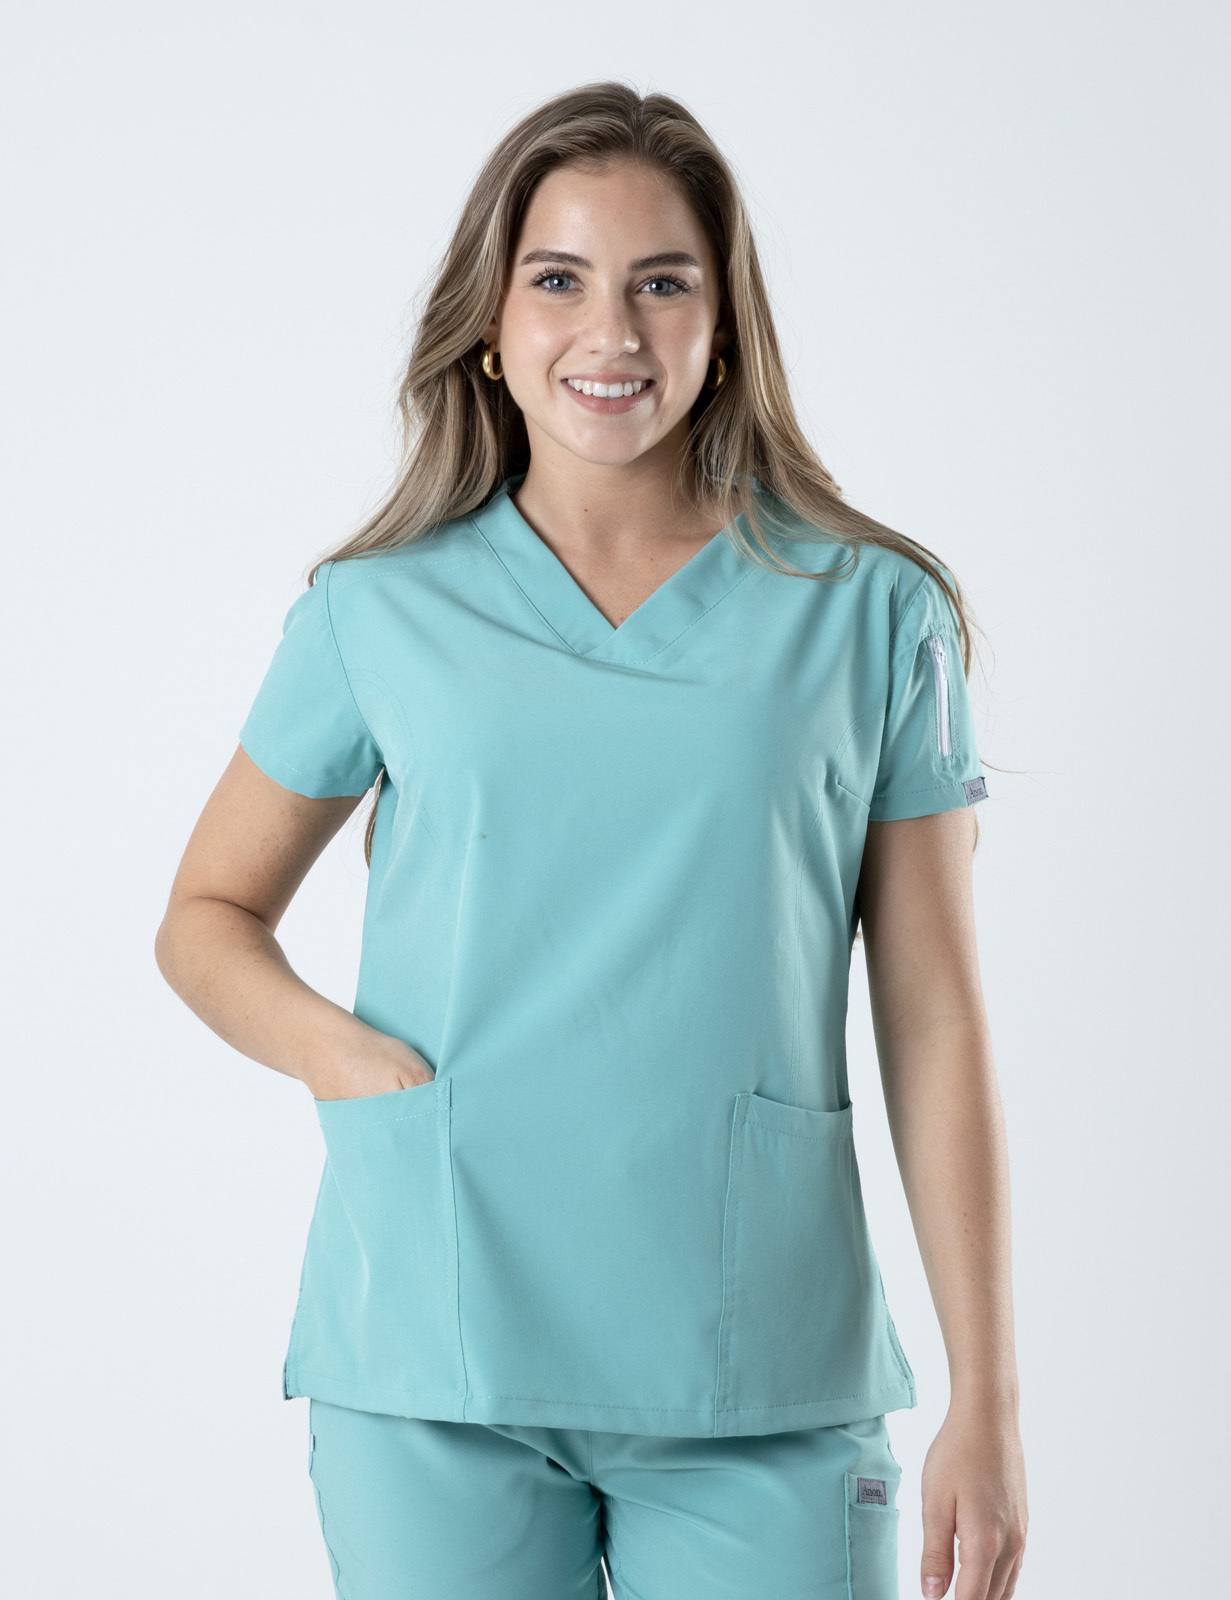 Anon Women's Scrub Top (Whisper Collection) Poly/Spandex - Cool Mint - XX Small